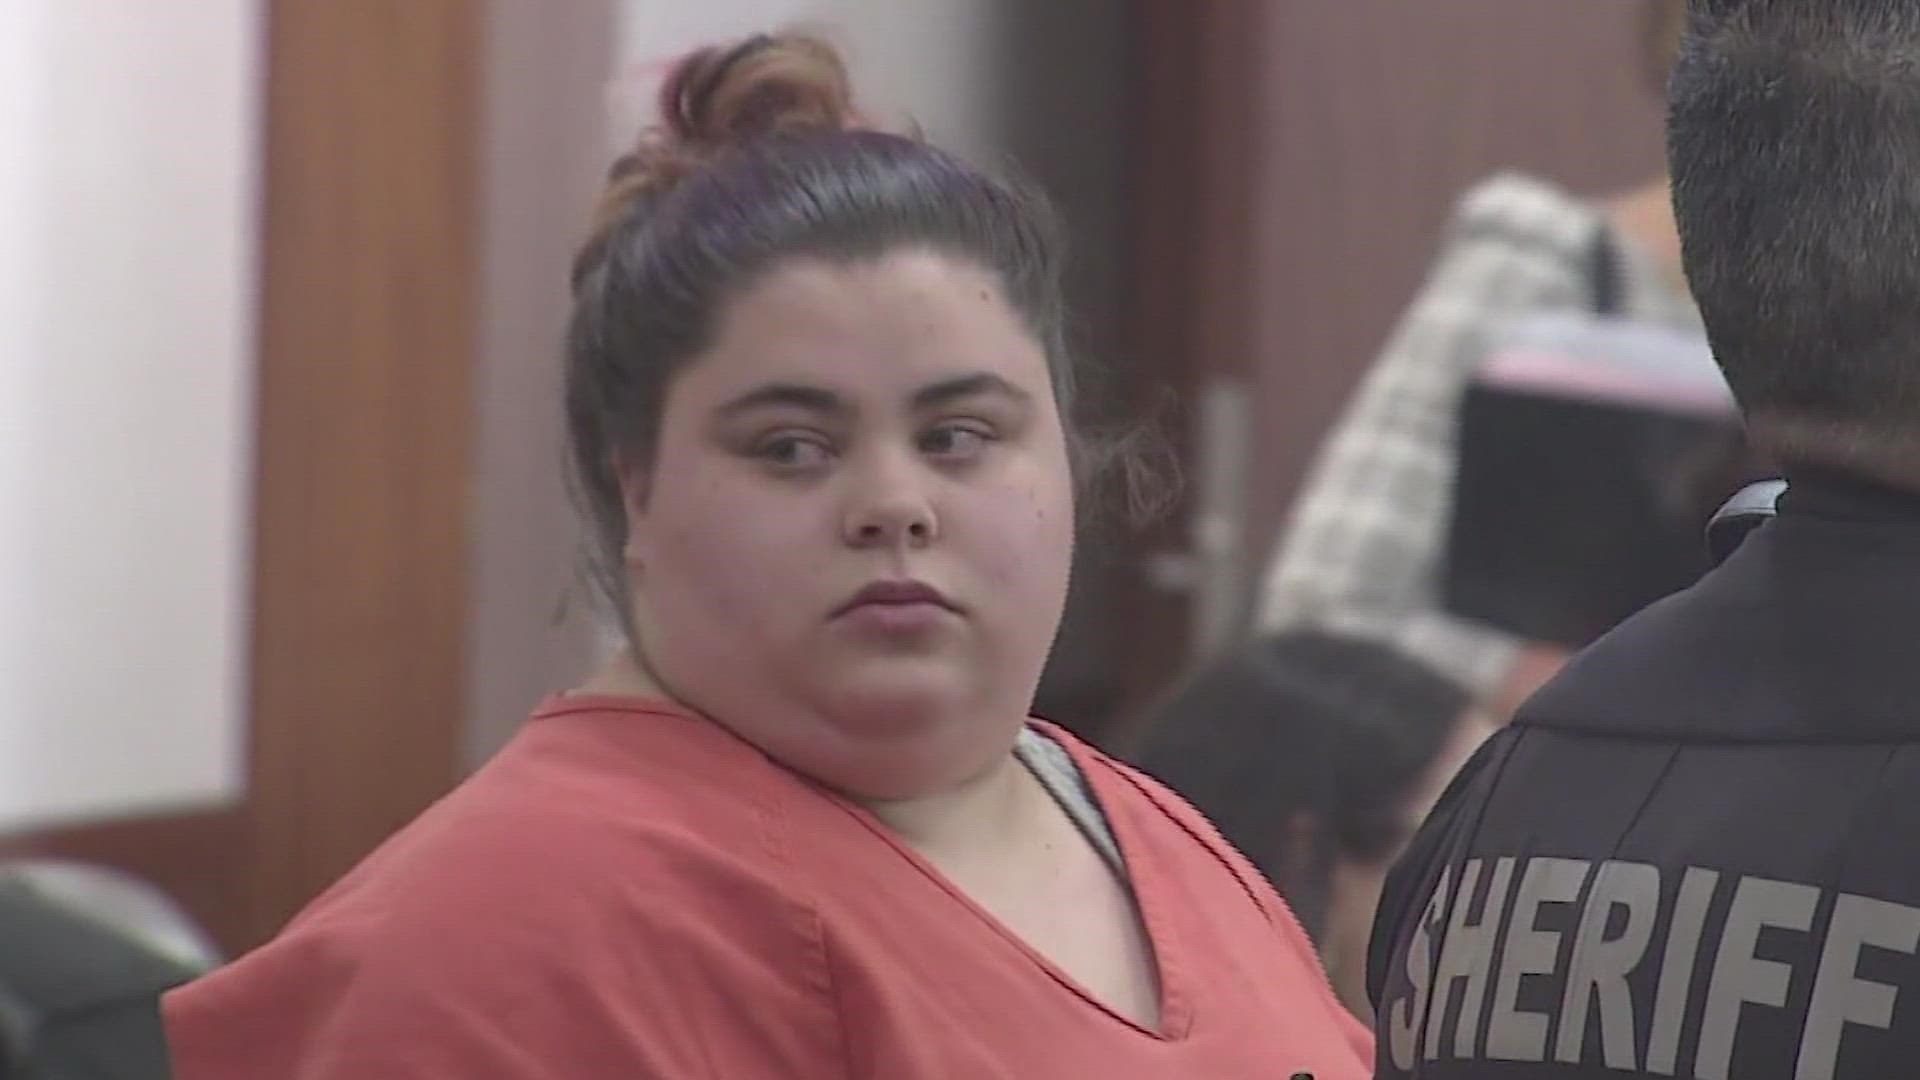 Kristie Julian appeared in court over the weekend and Tuesday morning after police said she took the baby from her mother and told law enforcement it was hers.